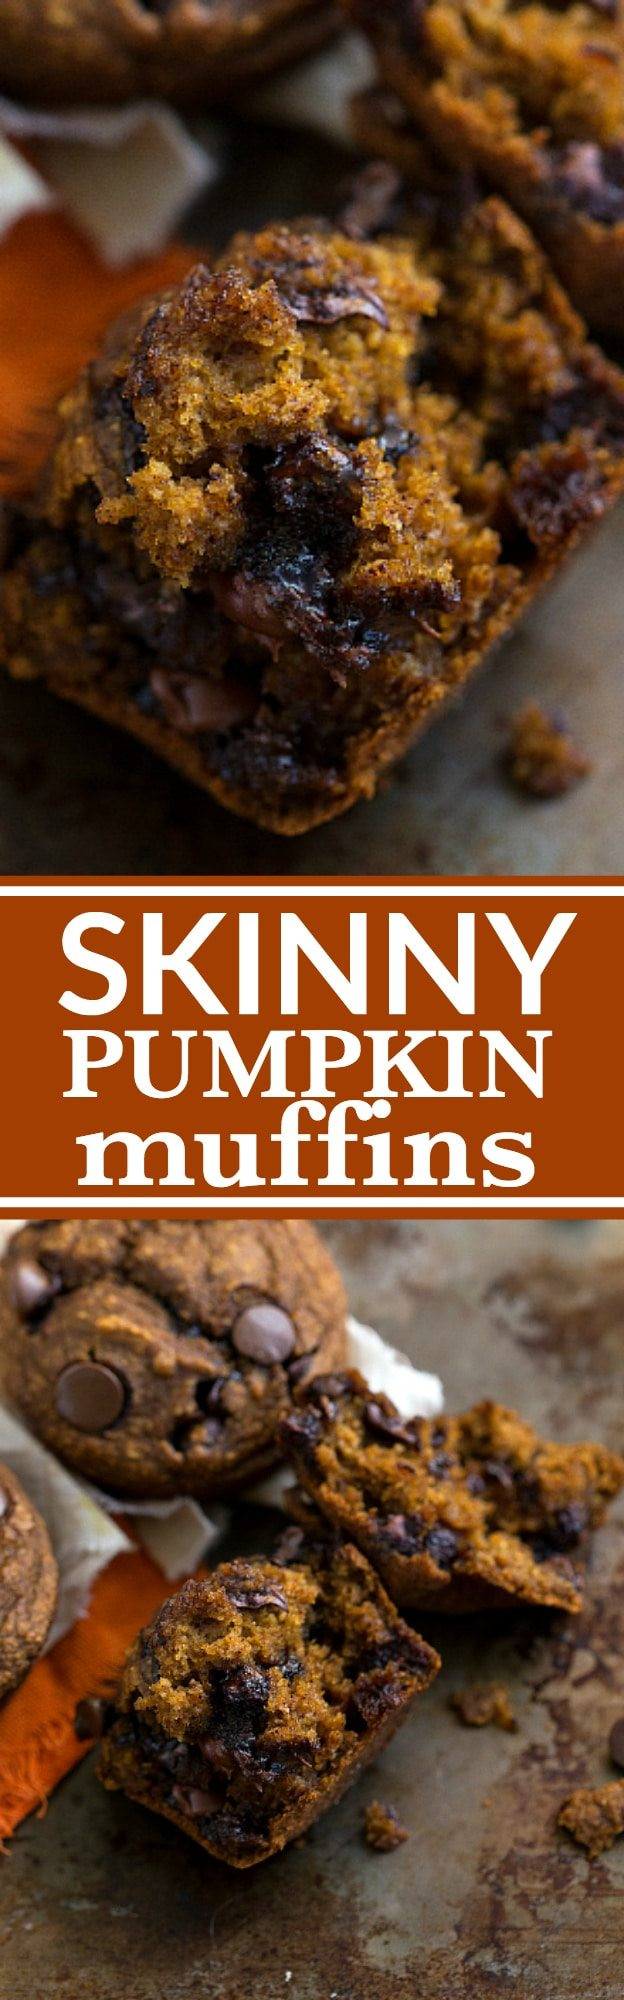 Low Calorie Chocolate Chip Muffins
 Skinny & Healthy Pumpkin Chocolate Chip Muffins